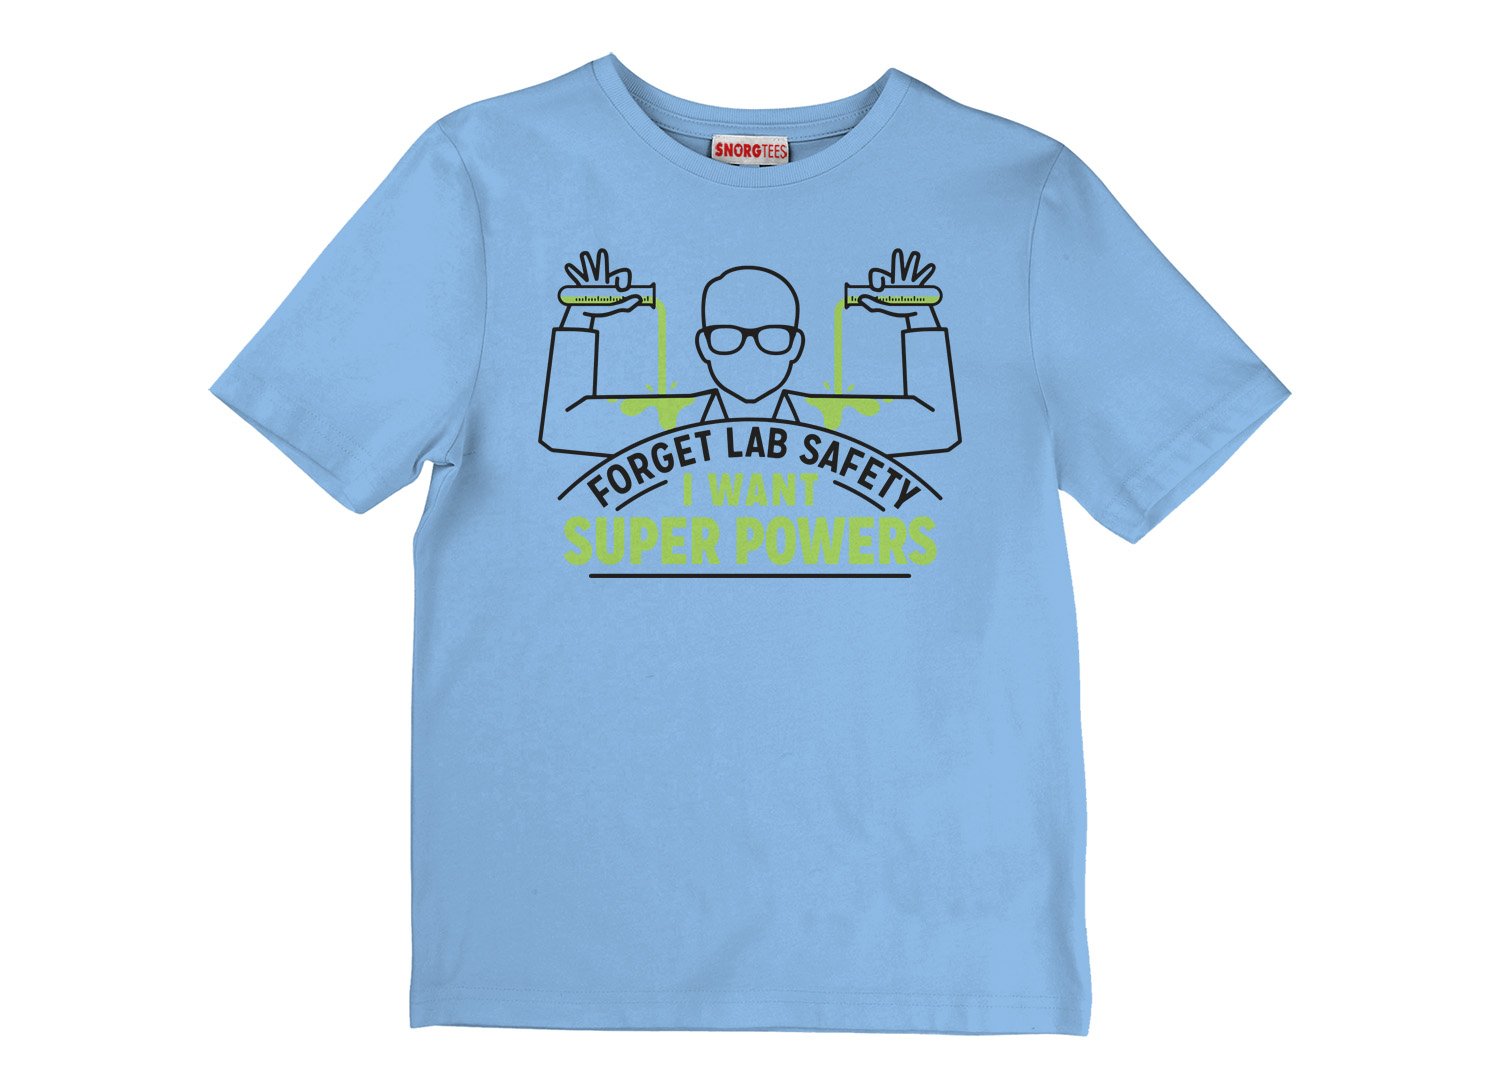 Forget Lab Safety T Shirt Image3